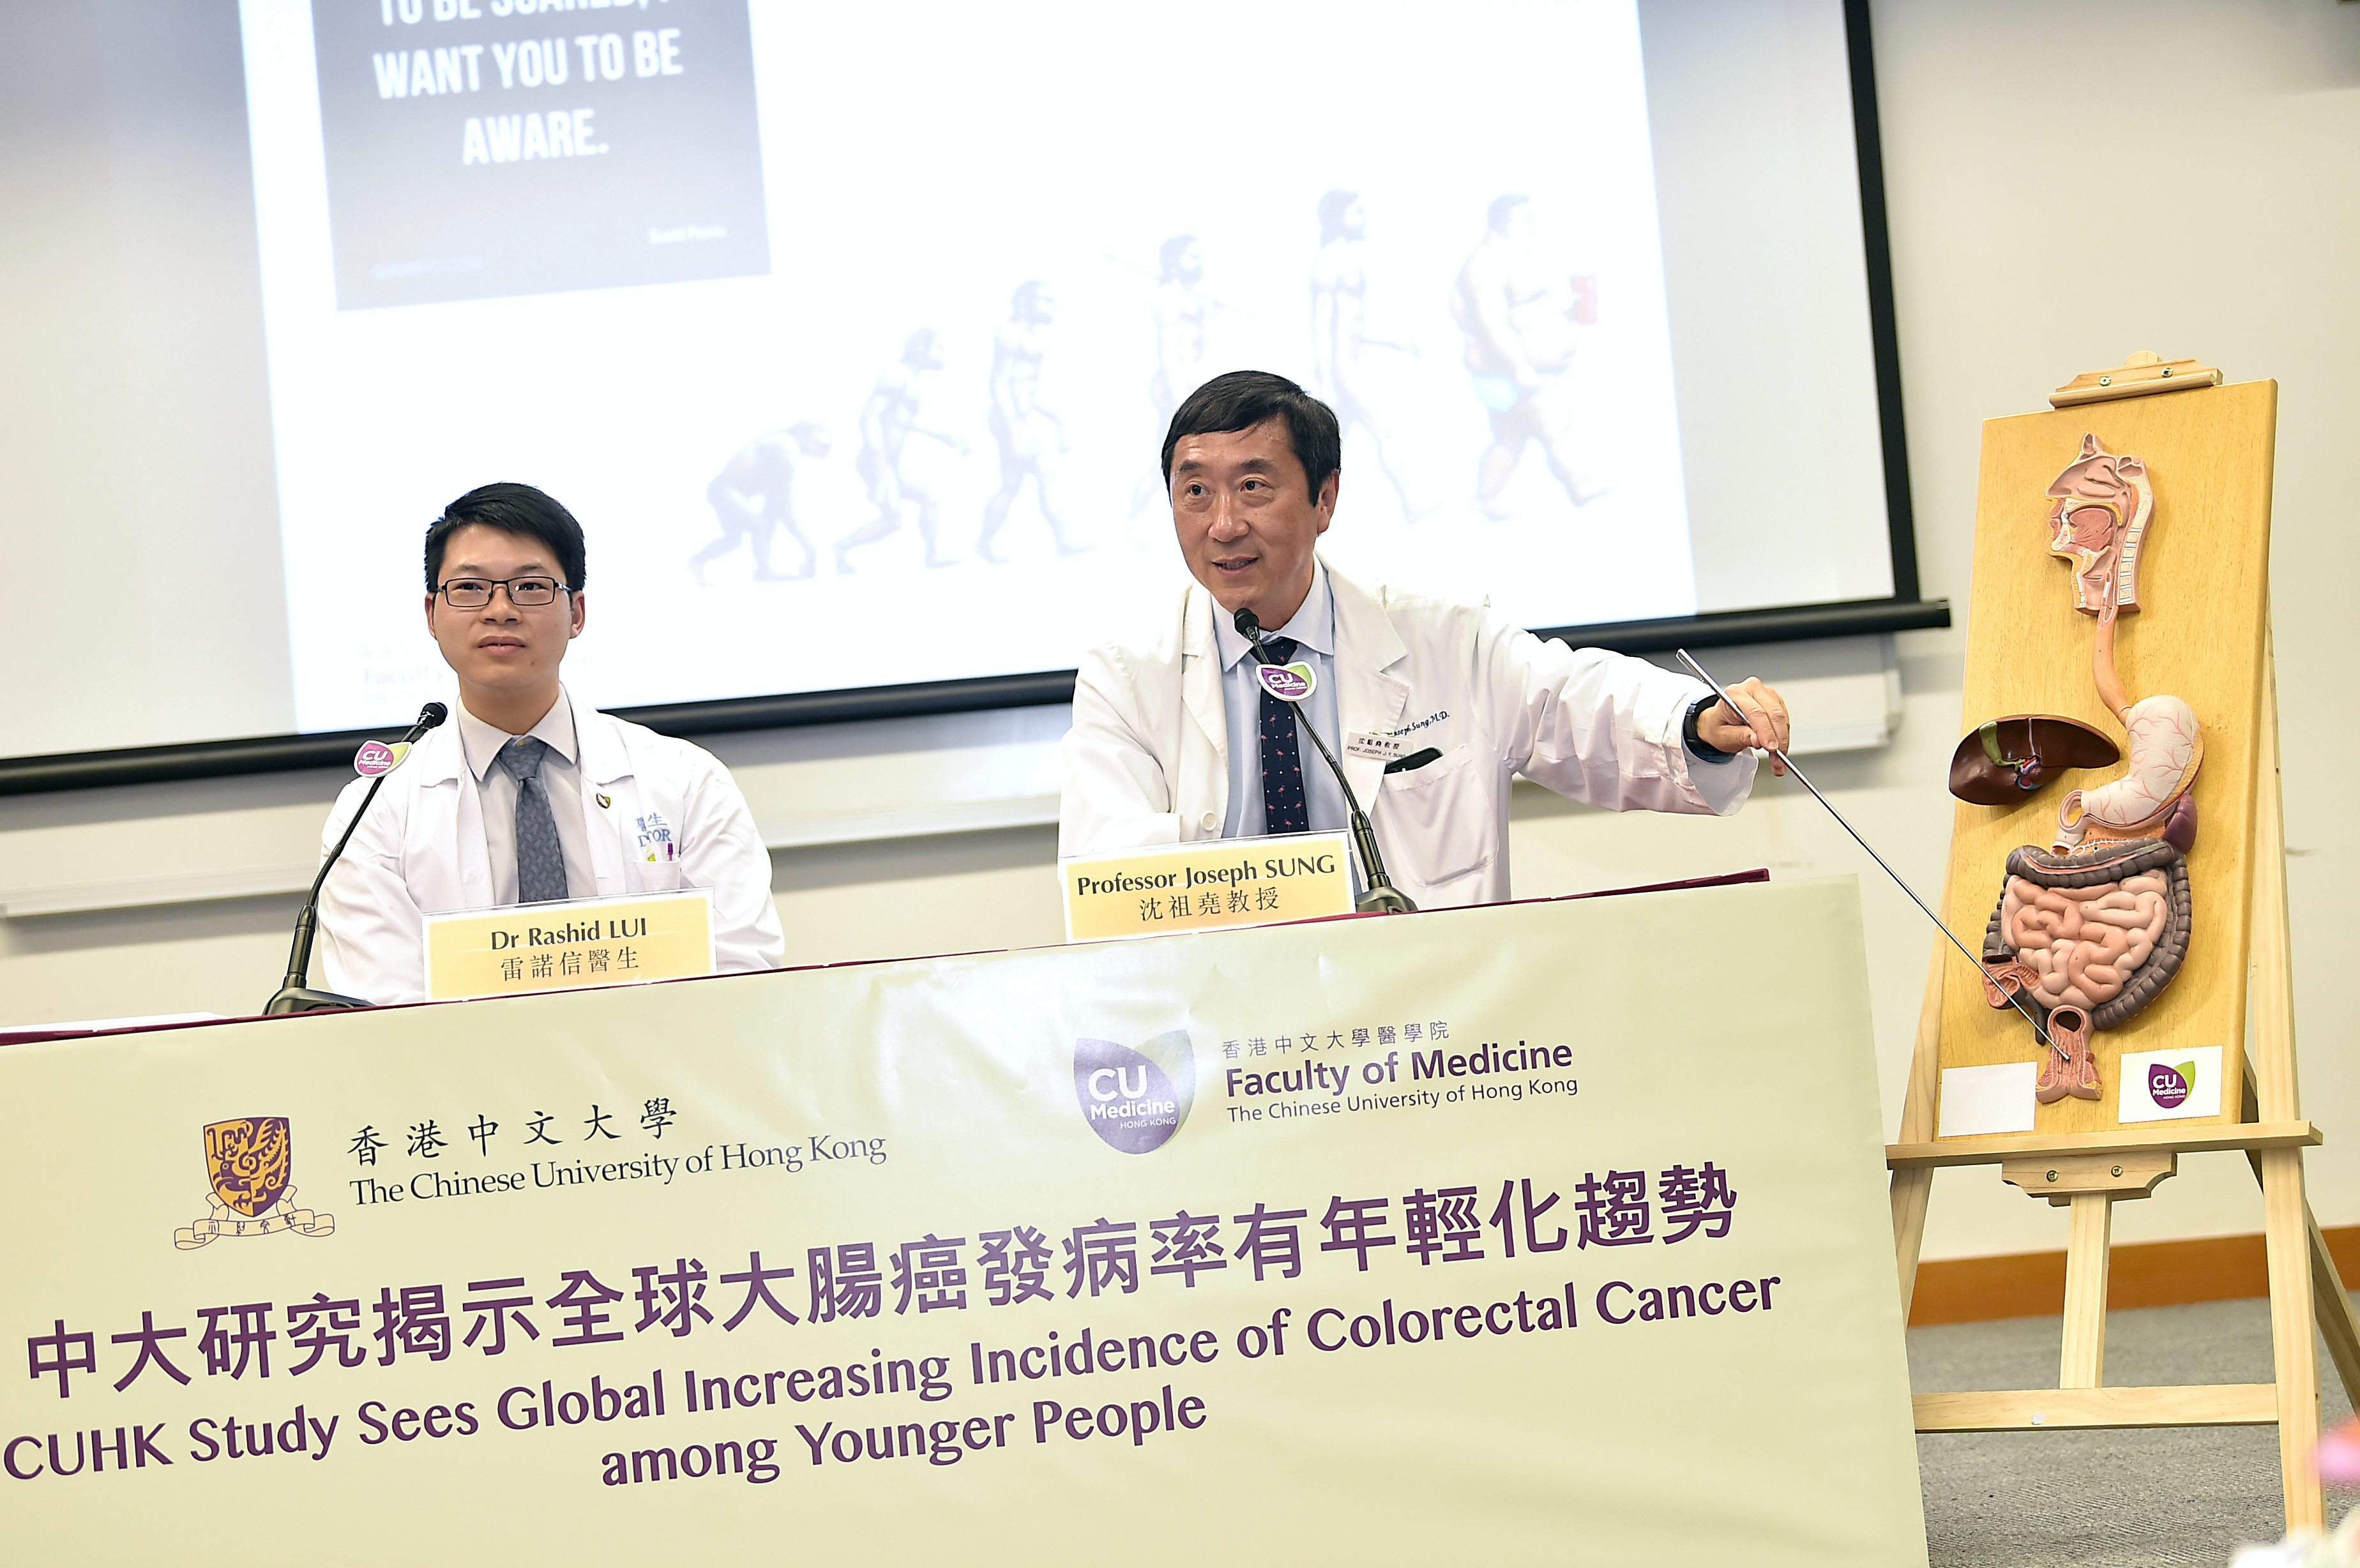 The latest research conducted by the gastroenterology team of the Faculty of Medicine and the Stanley Ho Big Data Decision Analytics Research Centre at CUHK revealed that the global incidence of colorectal cancer among younger individuals has been marked by a continual increase. Research team members include Professor Joseph SUNG (right), Mok Hing Yiu Professor of Medicine, and Dr. Rashid LUI, Clinical Tutor (honorary) of Department of Medicine and Therapeutics in Faculty of Medicine at CUHK. 